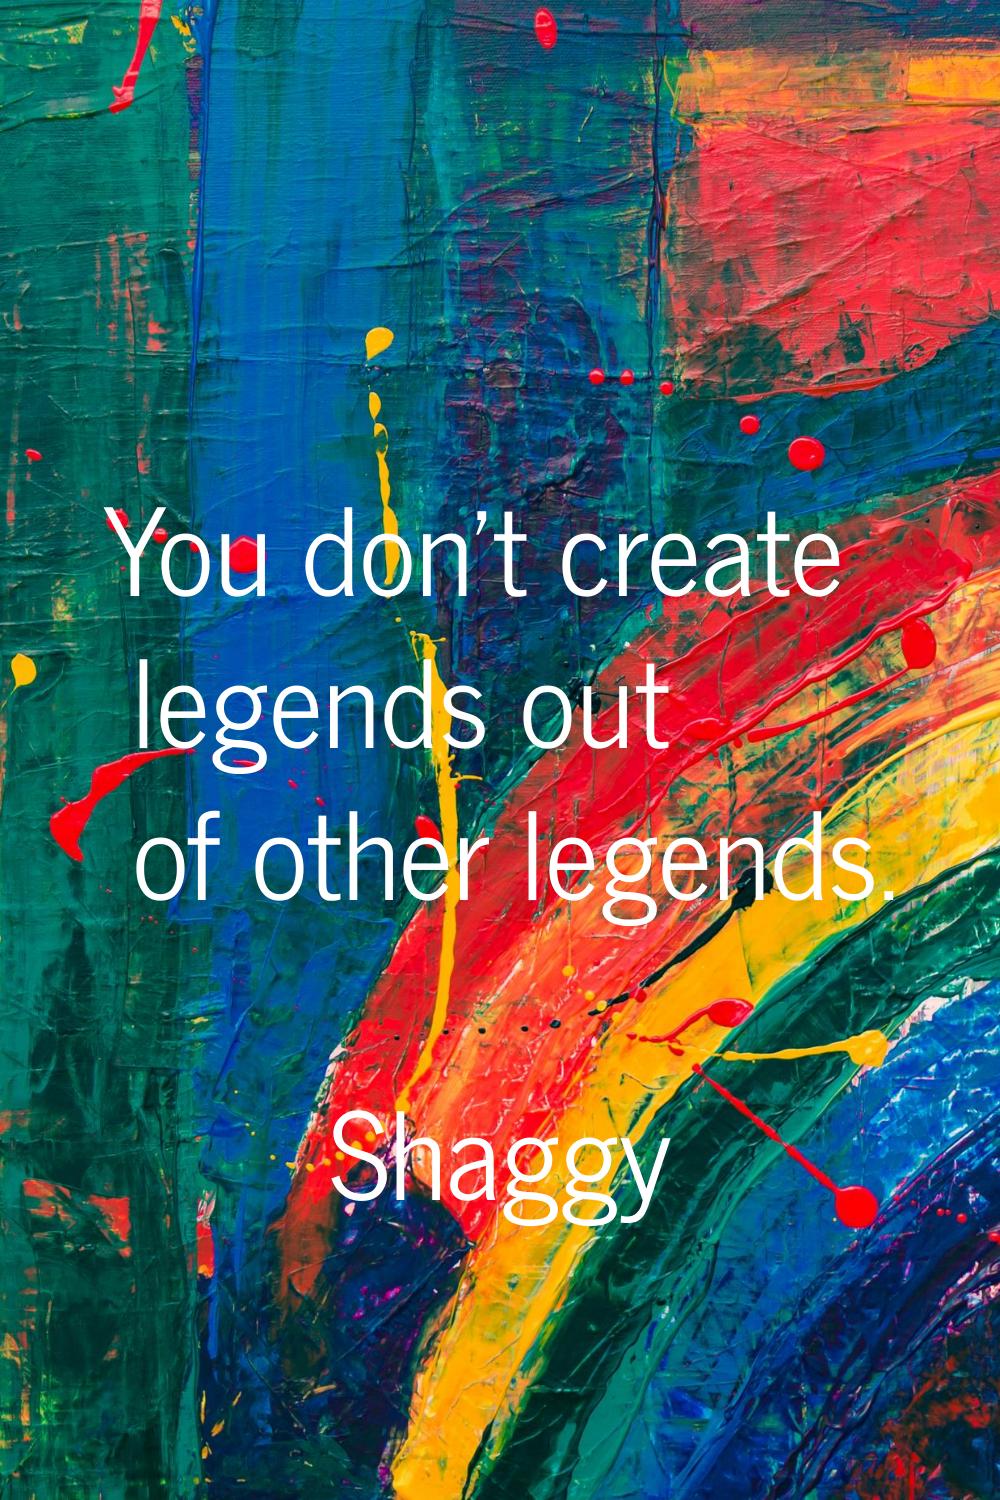 You don't create legends out of other legends.